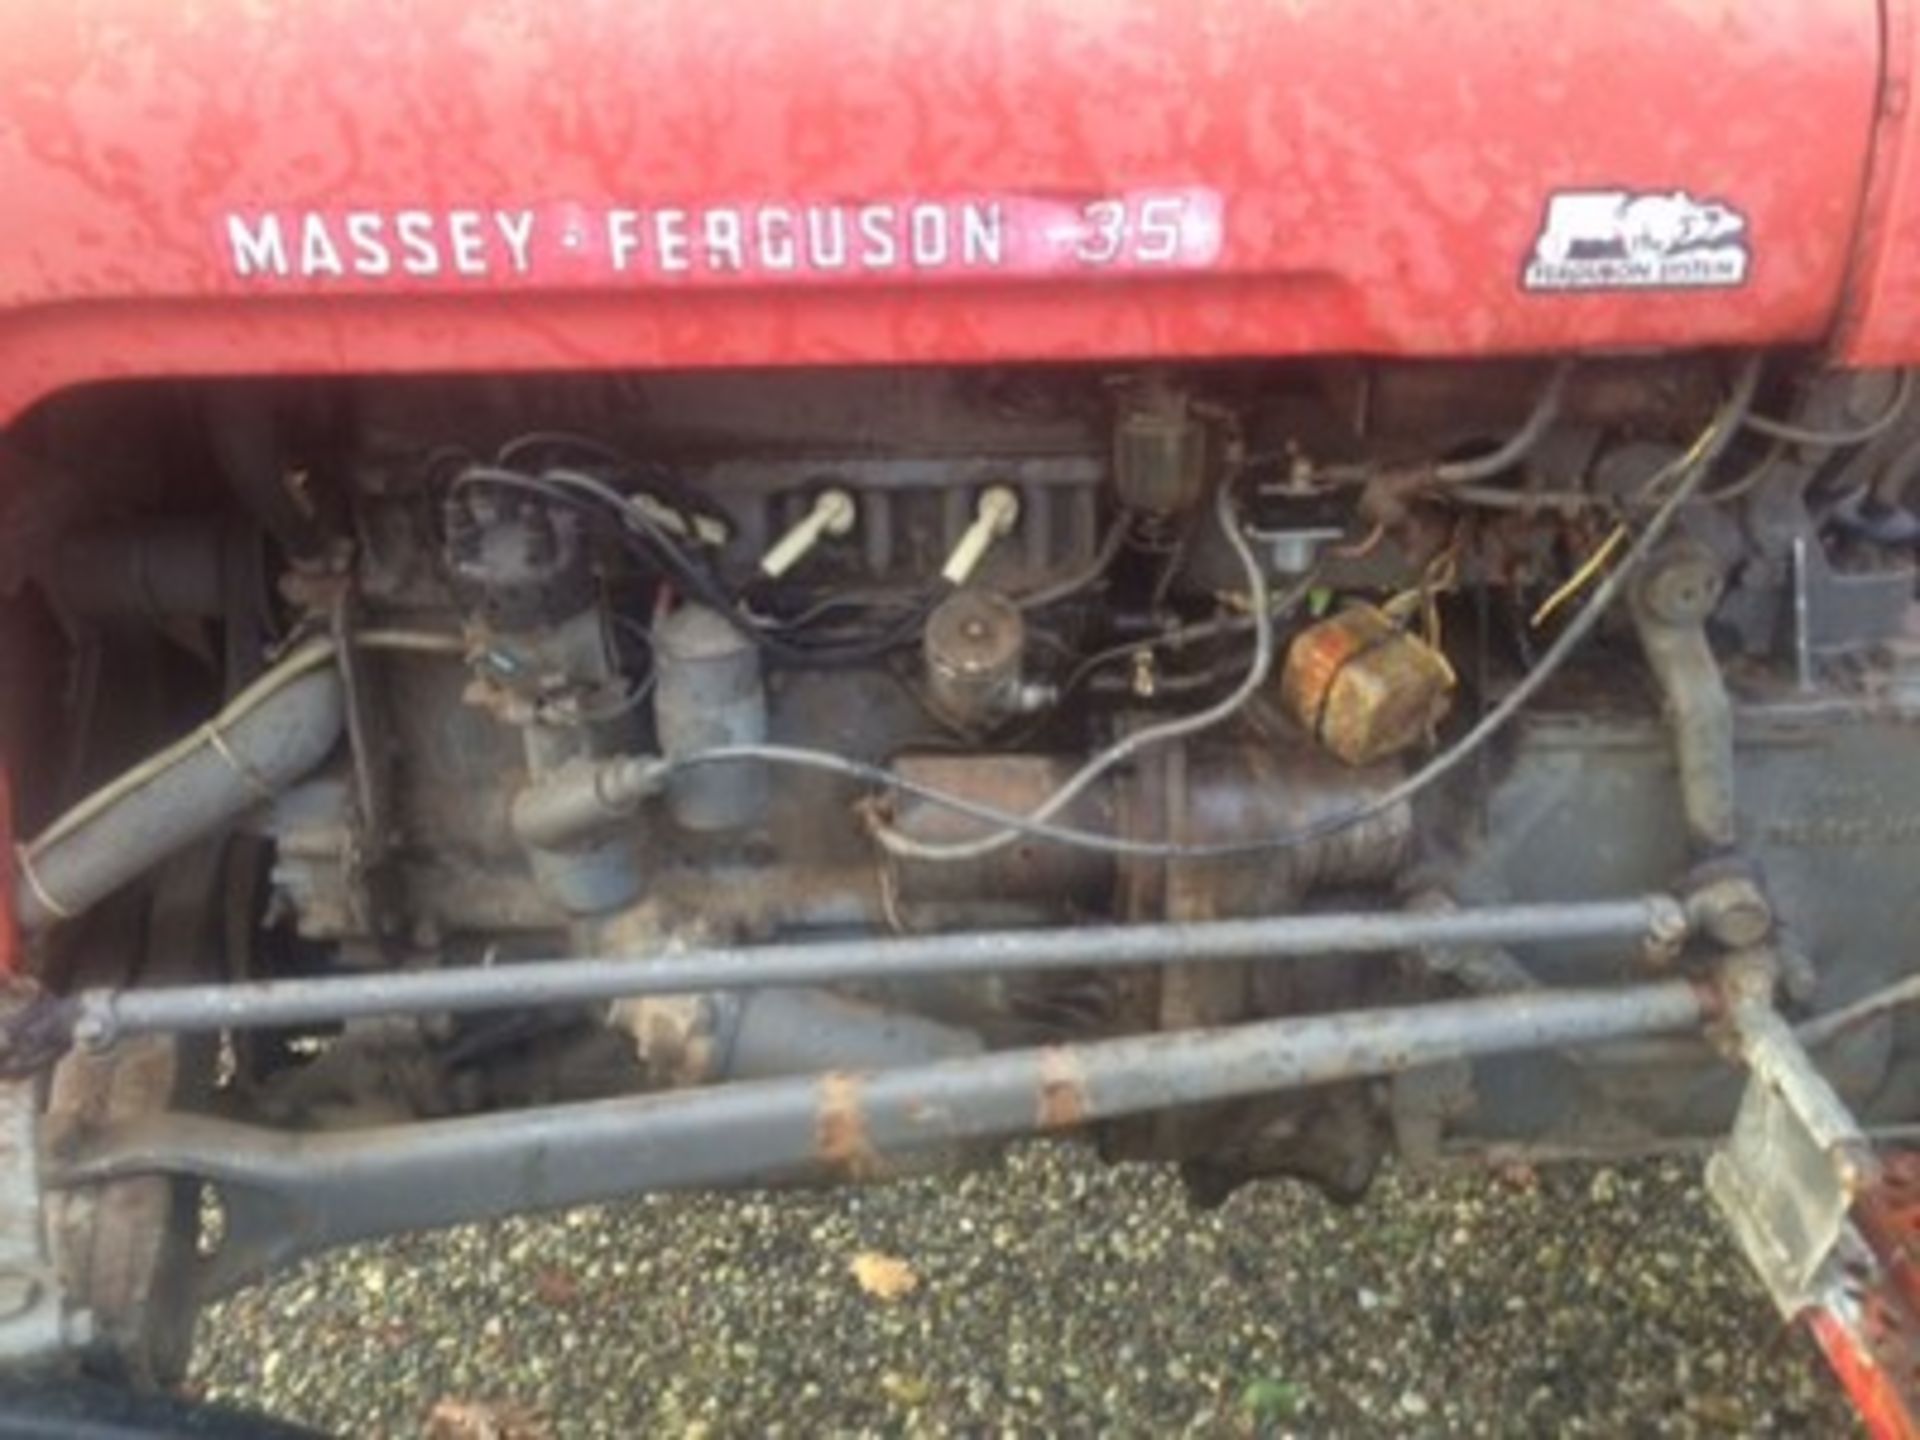 MASSEY FERGUSON Age unknown - these Tratctors where produced between 1956 and 1964 - this example - Image 2 of 10